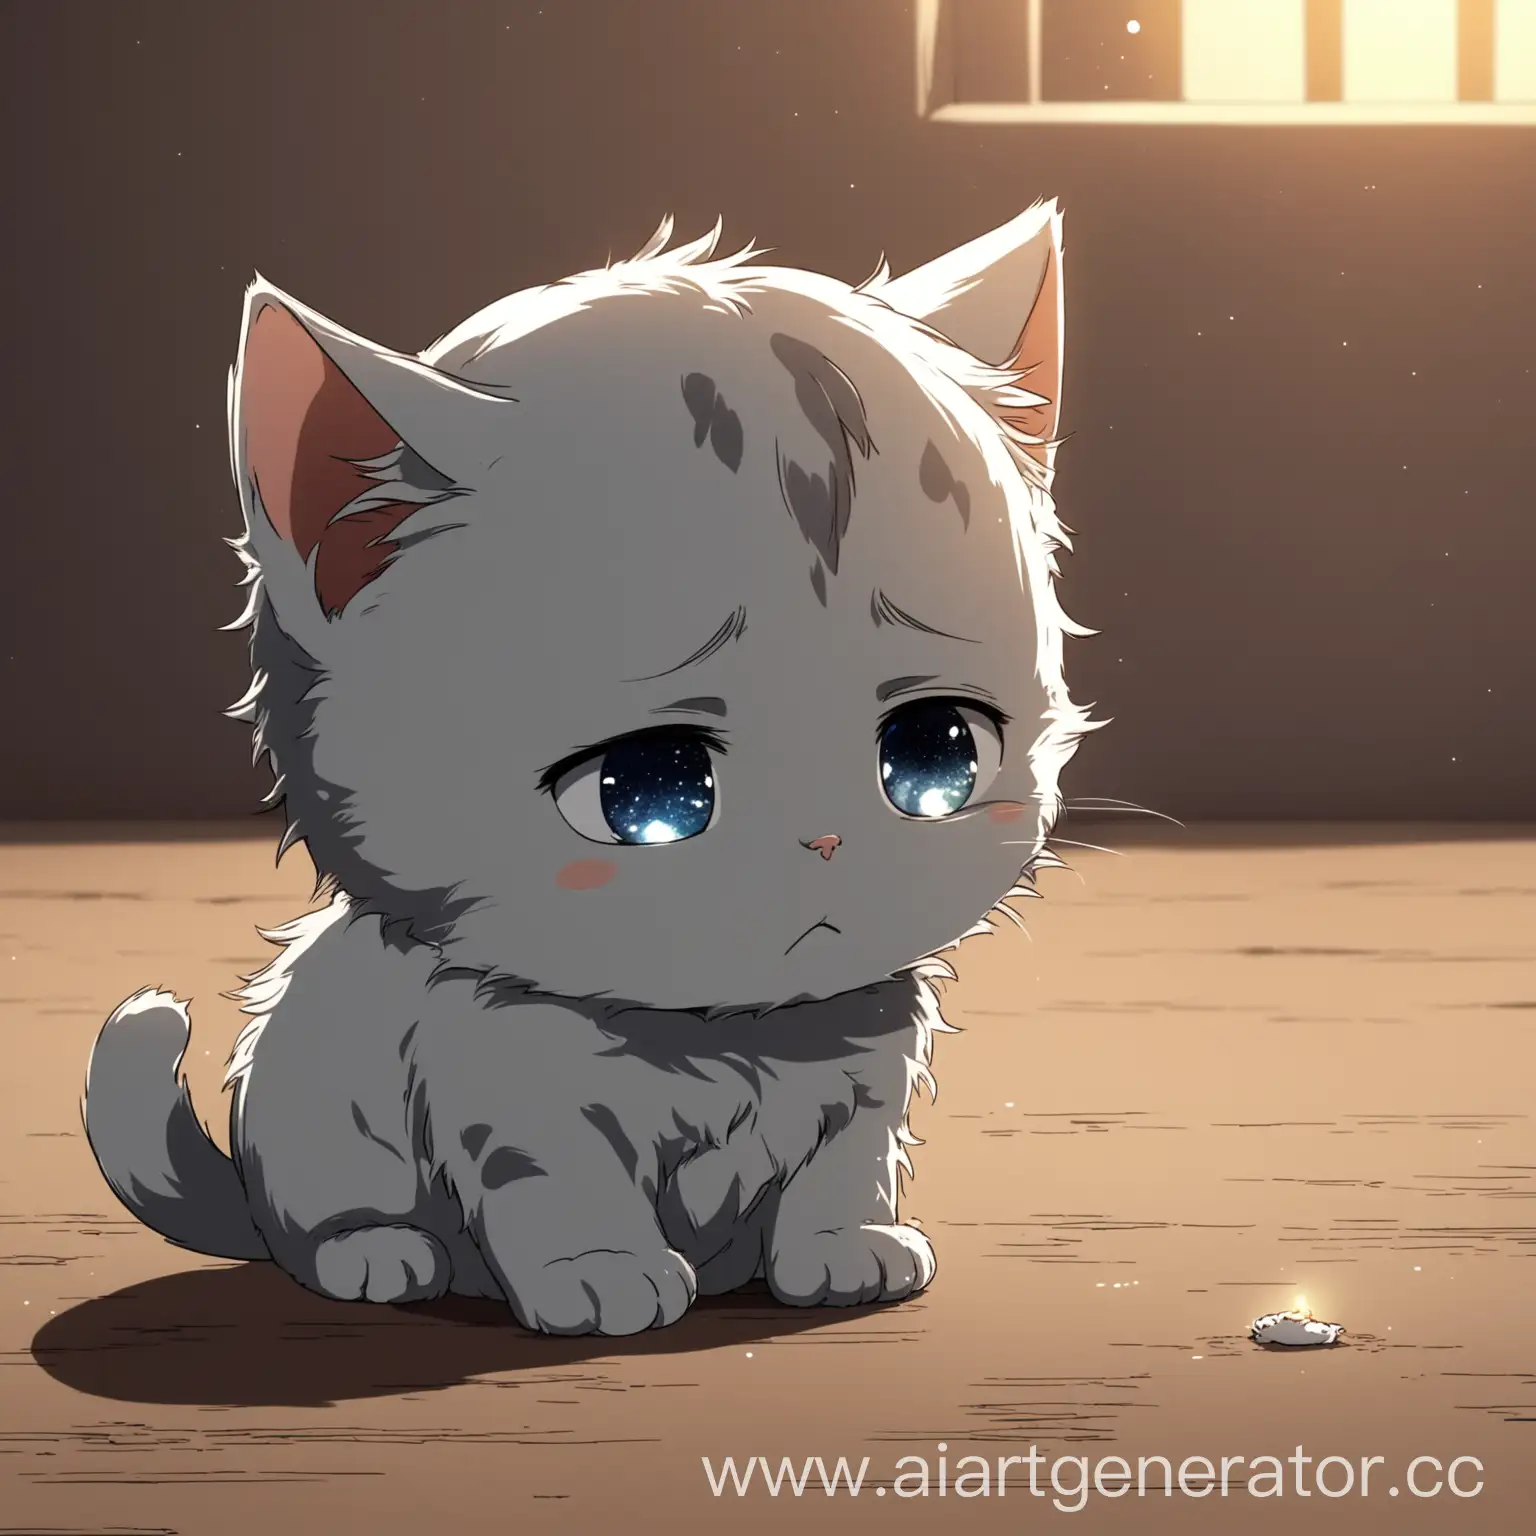 Lonely-Little-Kitten-Anime-Cartoon-Depicting-a-Sad-Story